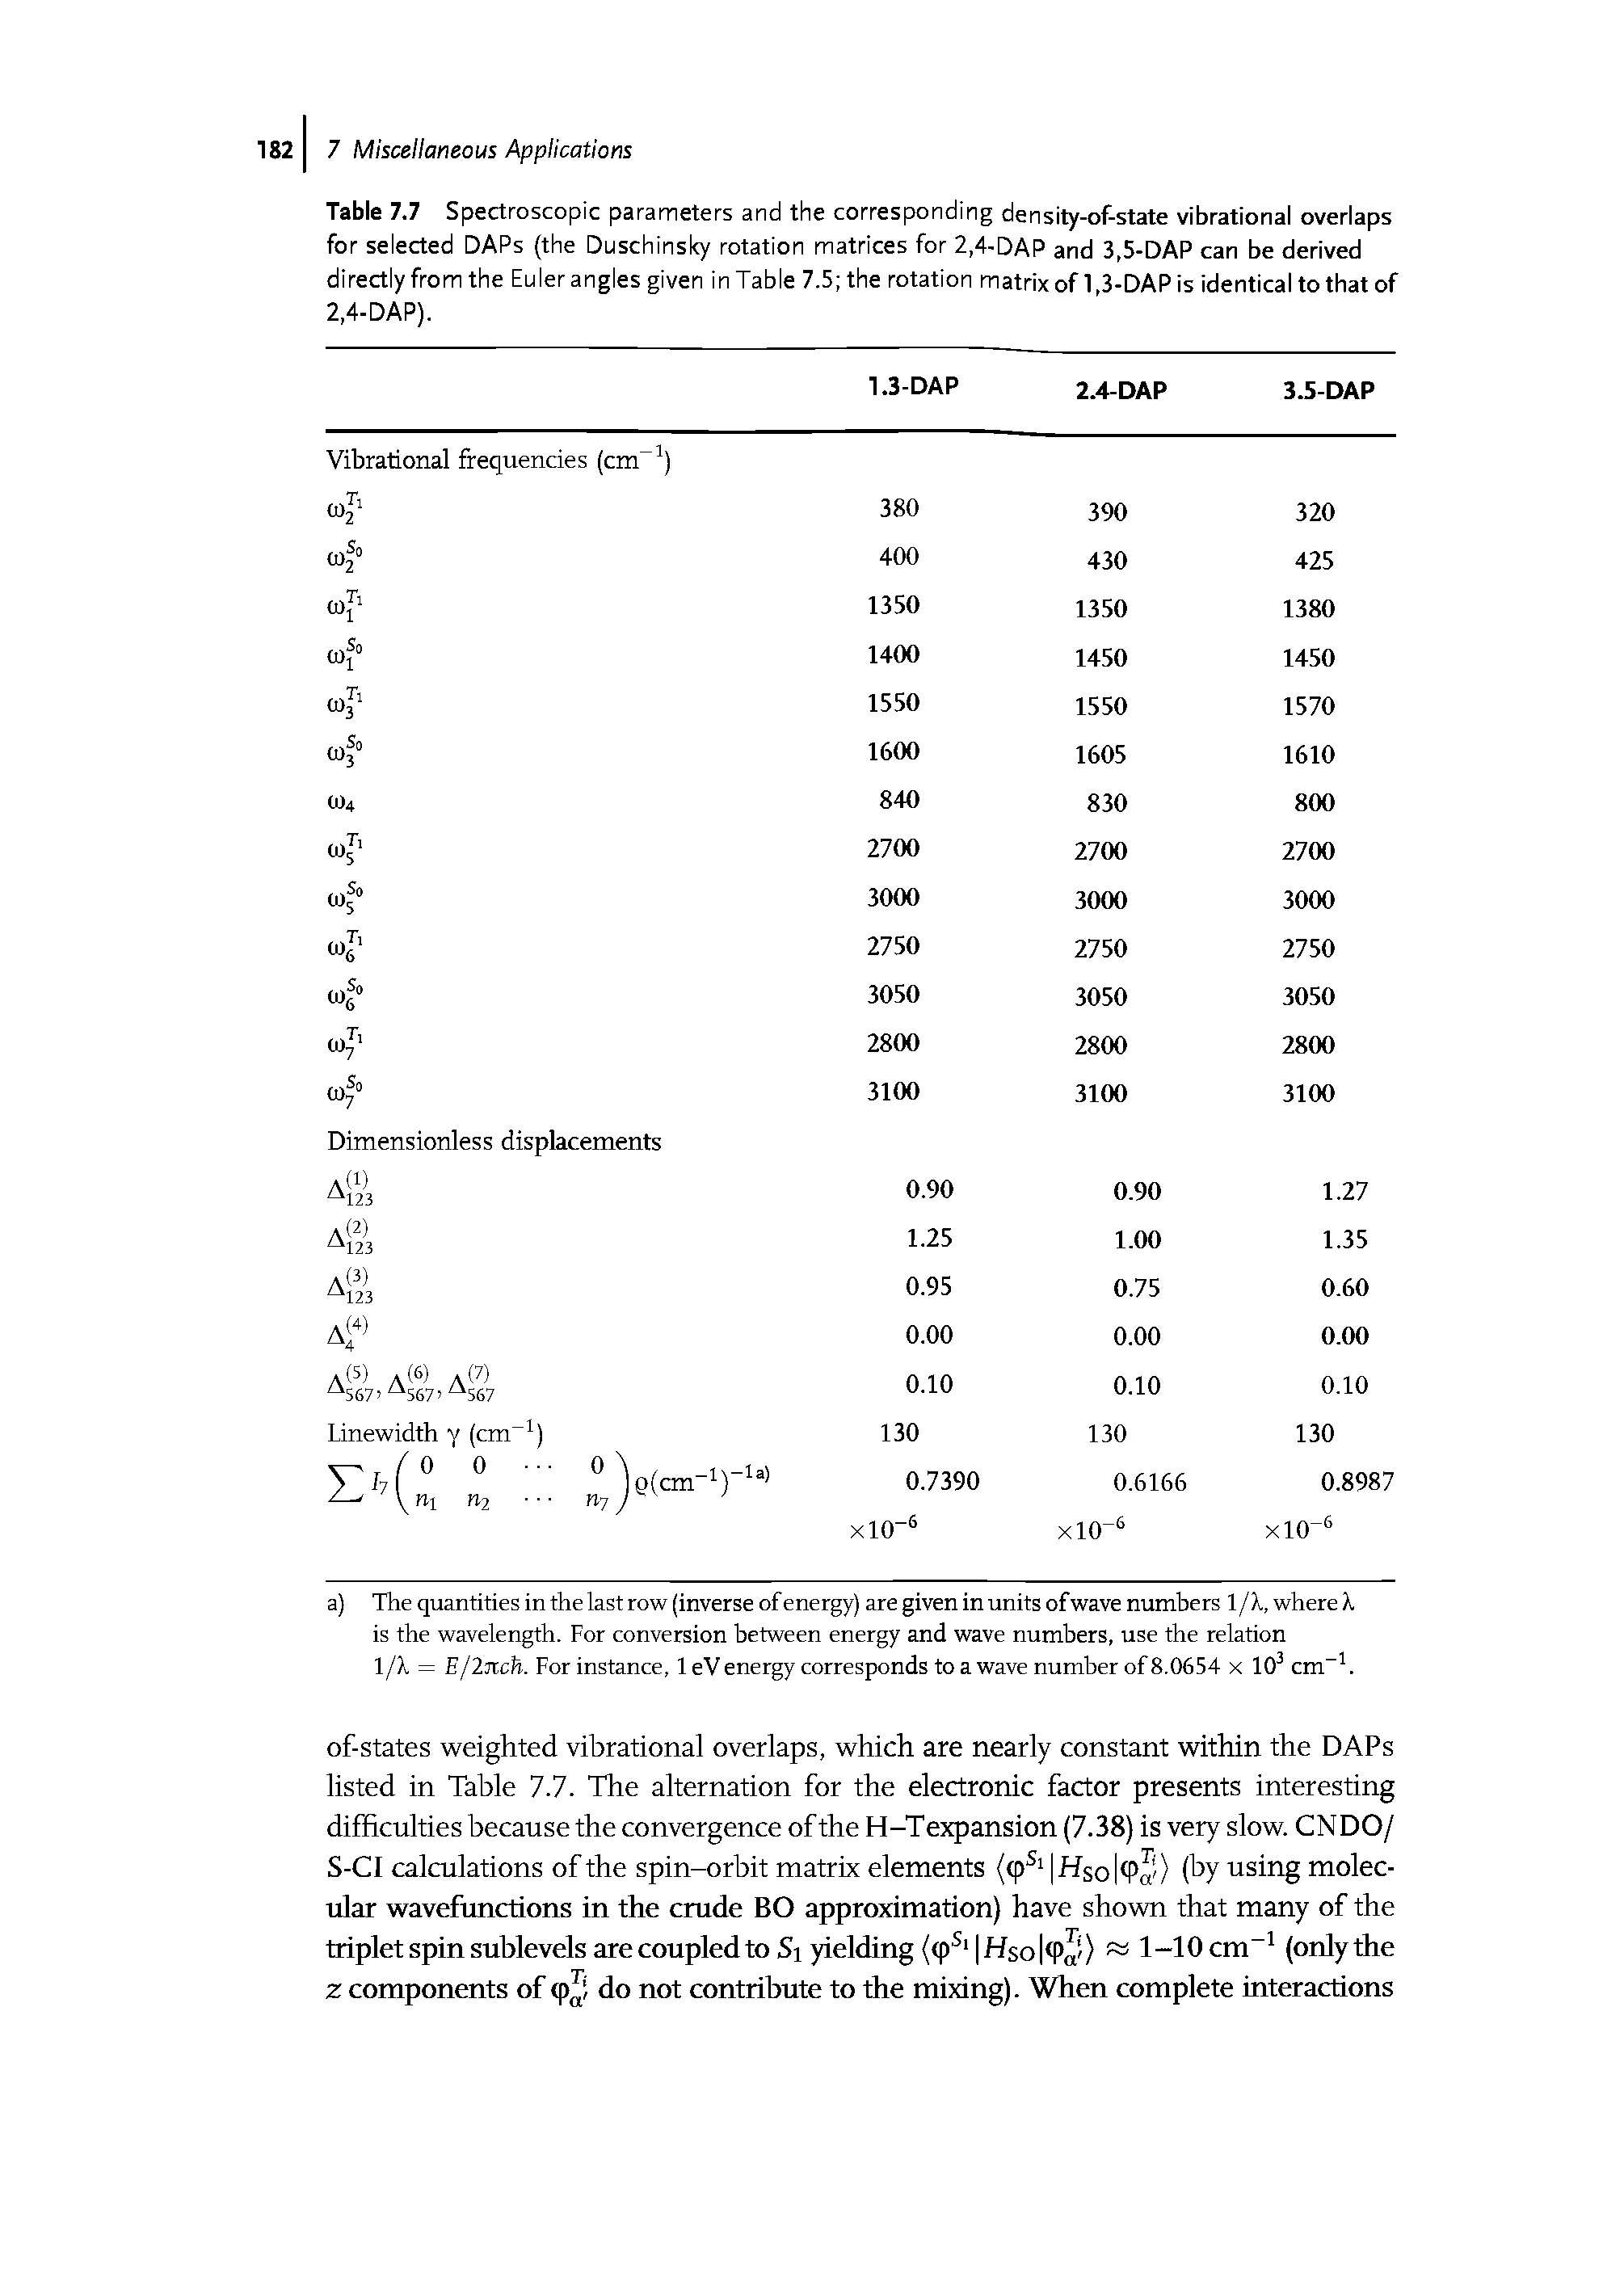 Table 7.7 Spectroscopic parameters and the corresponding density-of-state vibrational overlaps for selected DAPs (the Duschinsky rotation matrices for 2,4-DAP and 3,5-DAP can be derived directly from the Euler angles given in Table 7.5 the rotation matrix of 1,3-DAP is identical to that of 2,4-DAP).